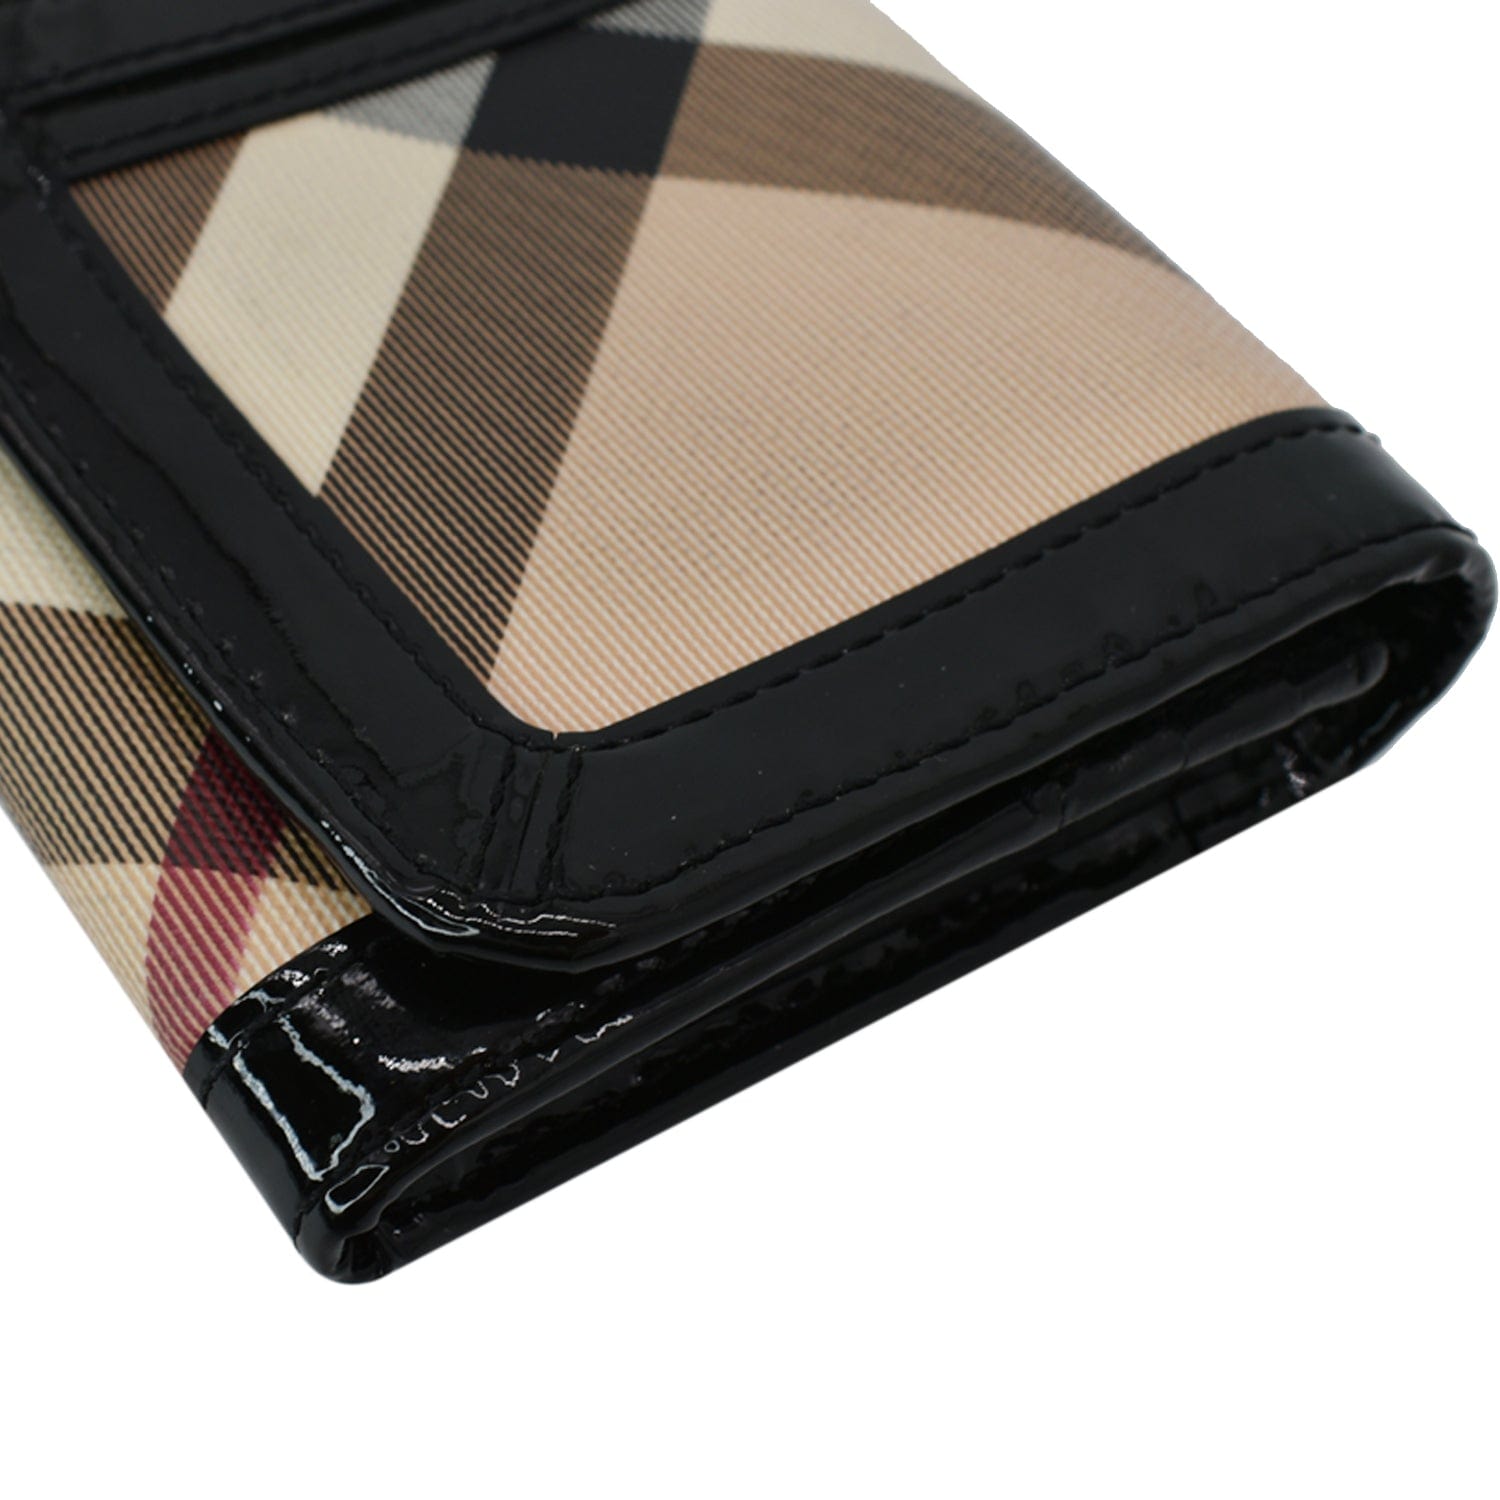 Burberry Check Continental Wallet